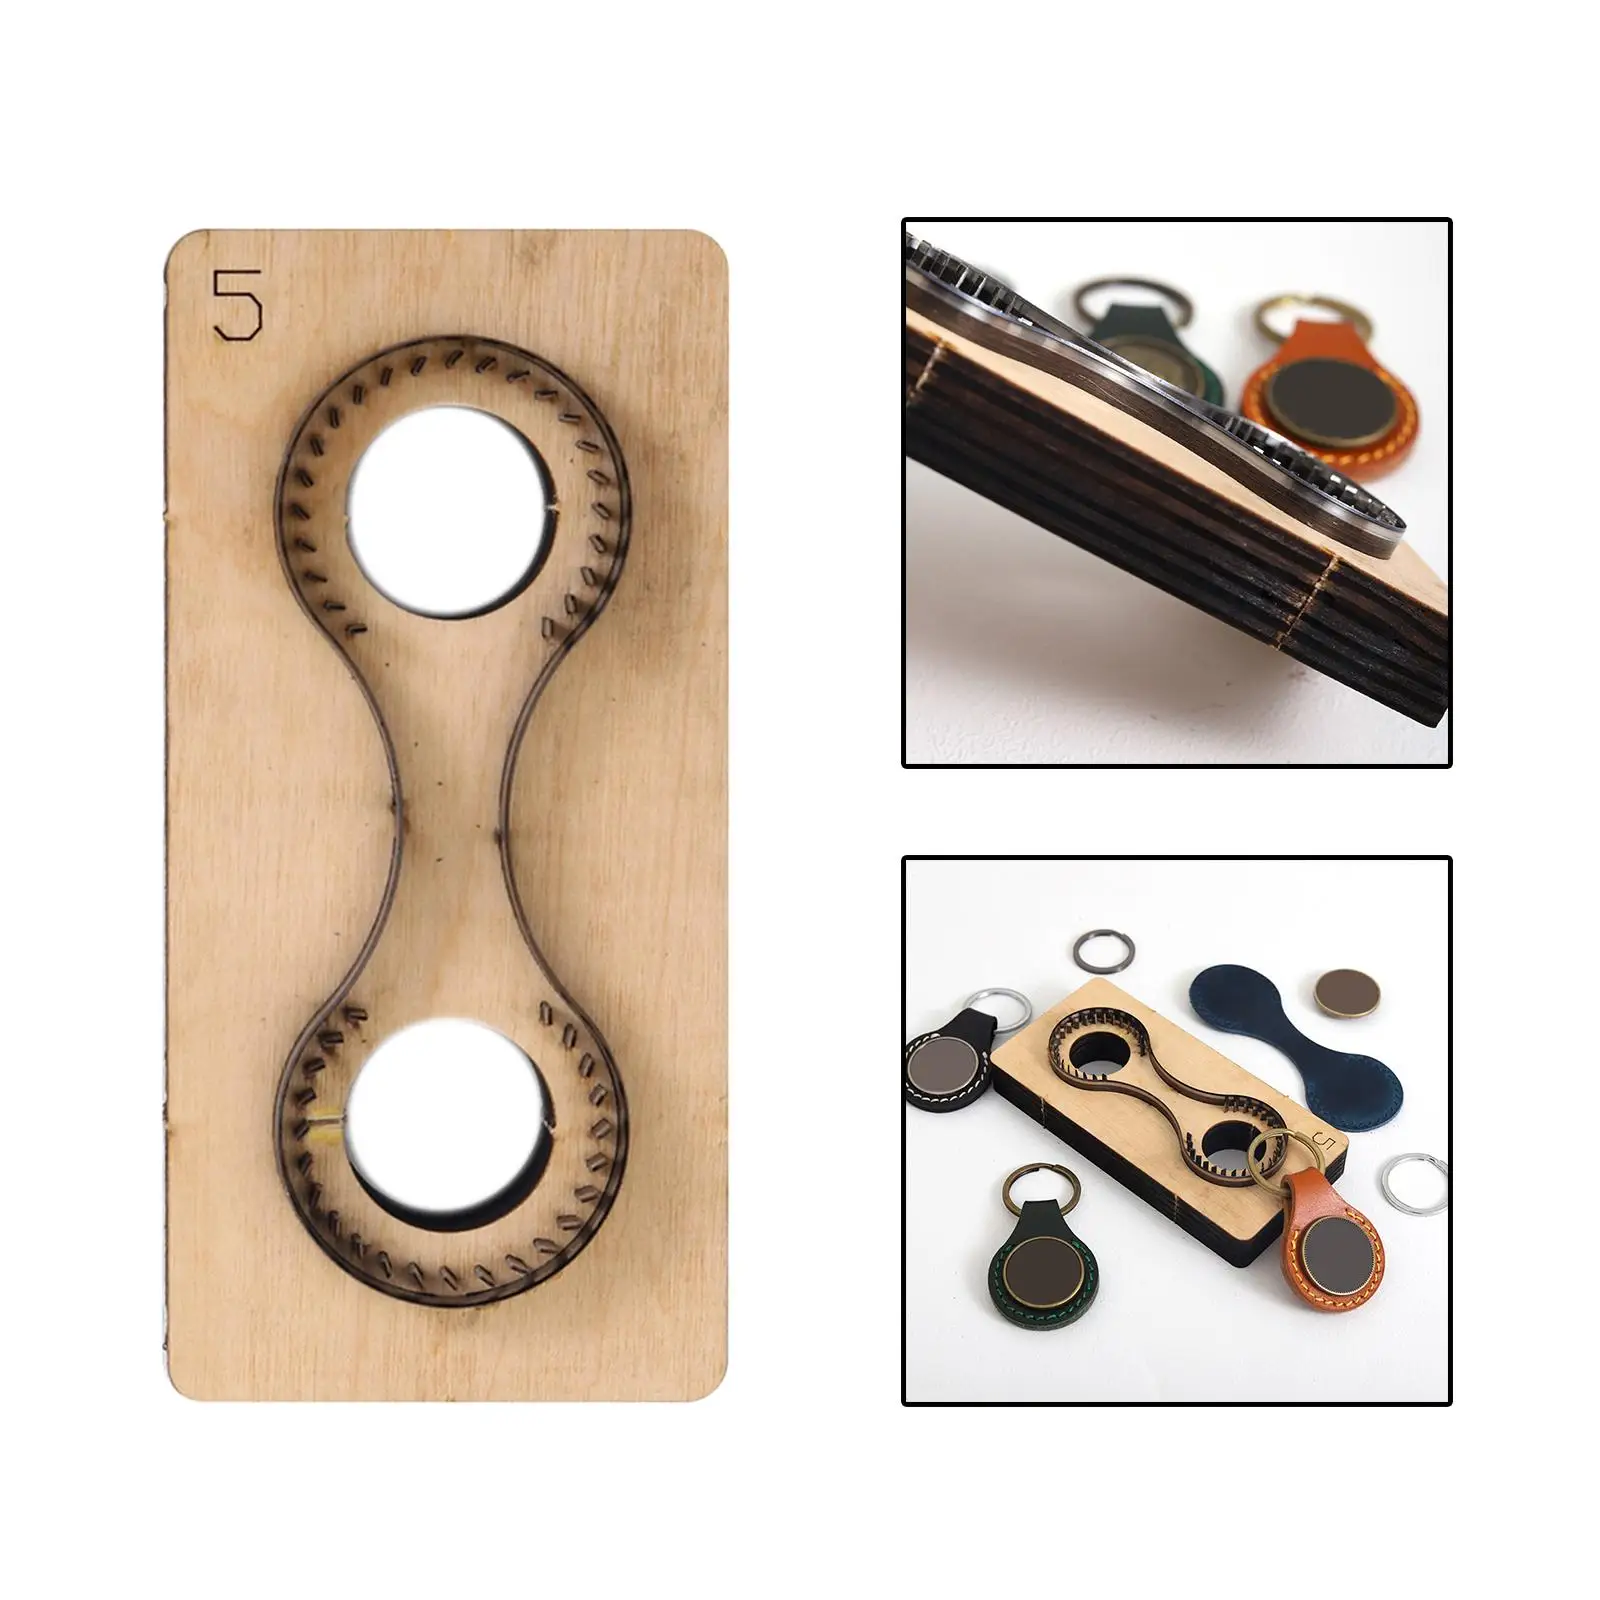 Metal Cutting Dies Key Ring 1Pcs Hand Punch Knife Mould Tool Set Template Craft DIY Wooden Cutter for Leathercraft Keychain